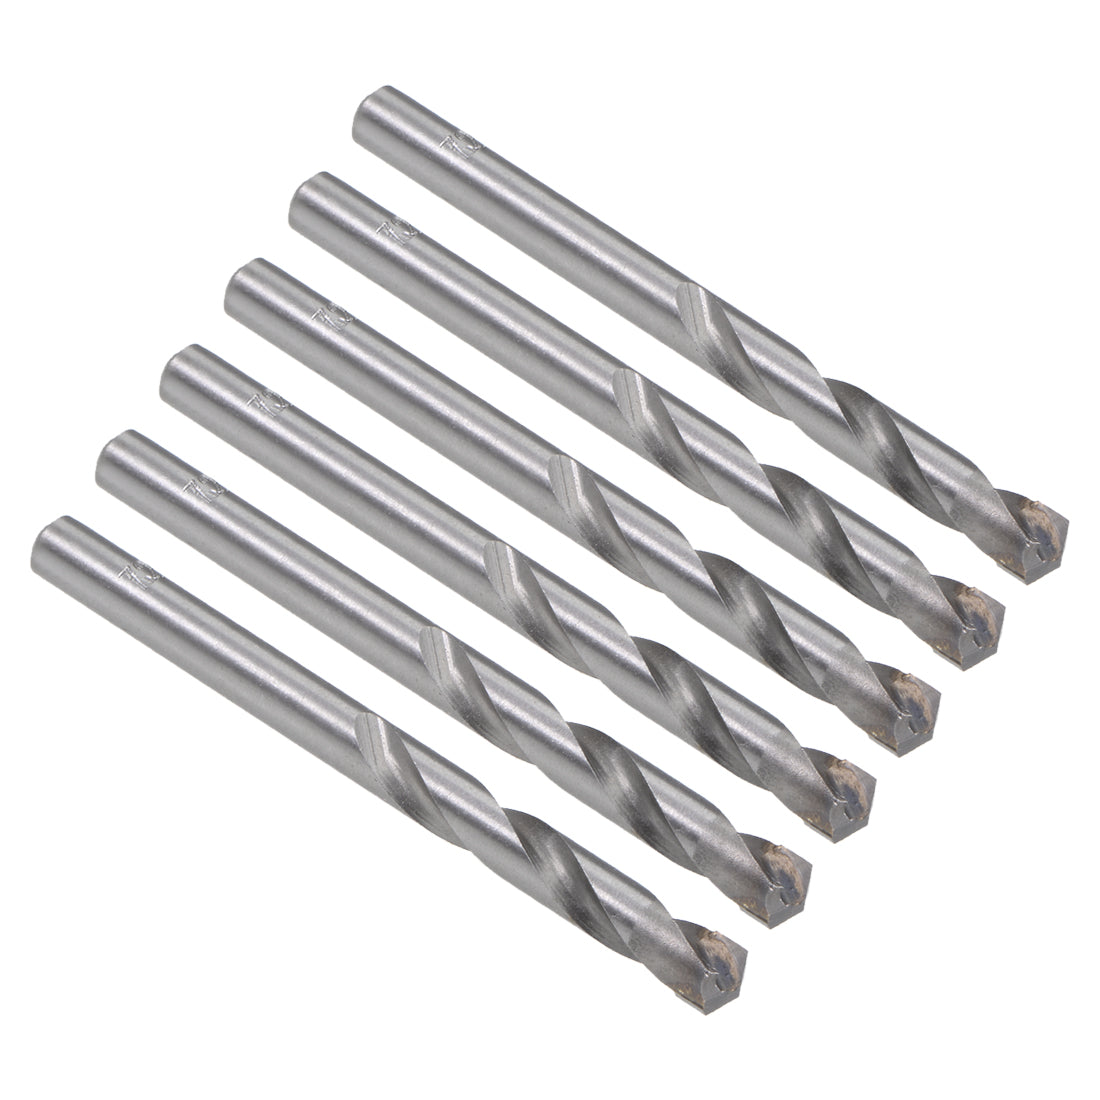 uxcell Uxcell 7.2mm Cemented Carbide Twist Drill Bits for Stainless Steel Copper Aluminum 6Pcs